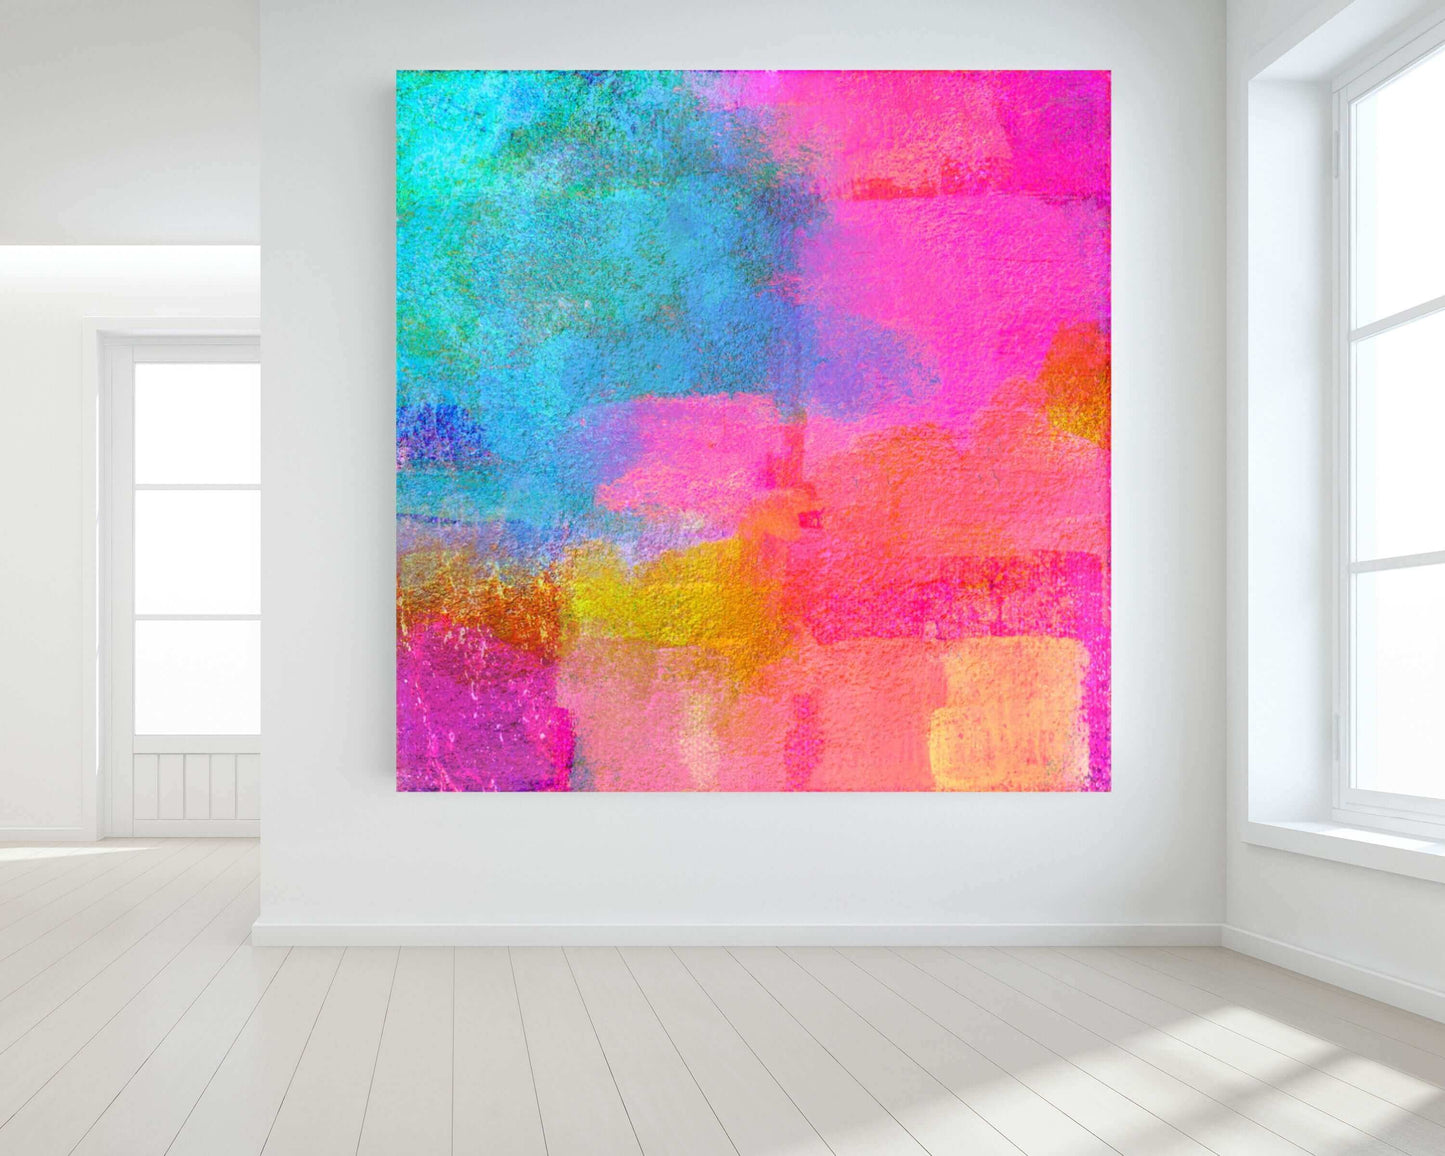 Bold Pink and Blue “Monaco” Abstract Art Canvas Print Wall Art Large Canvas on Wall